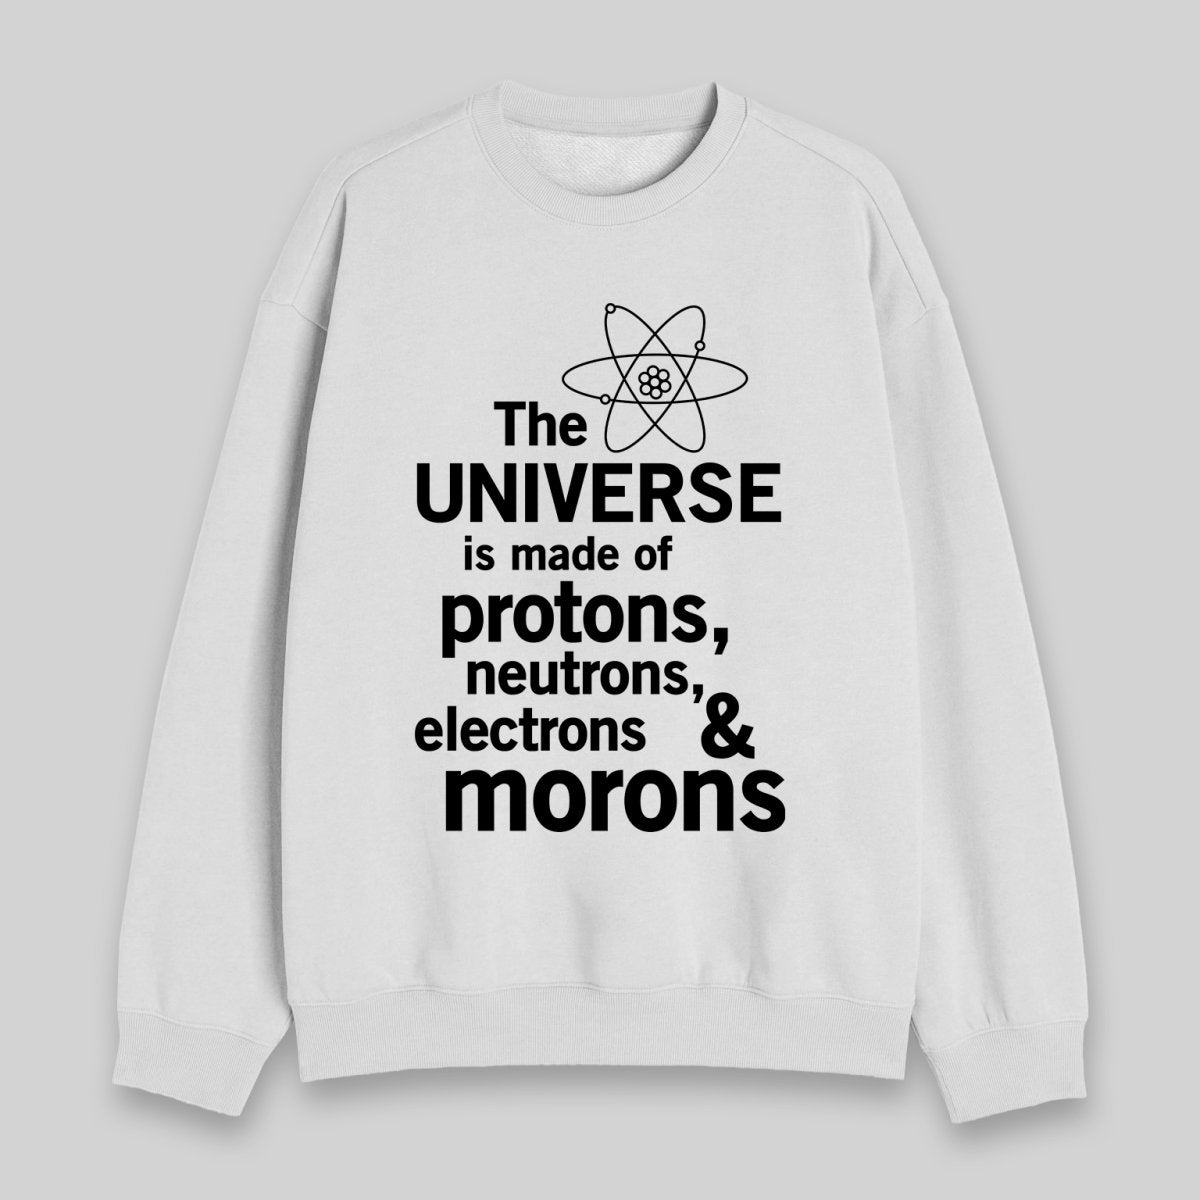 The Composition of The Universe Sweatshirt - Geeksoutfit